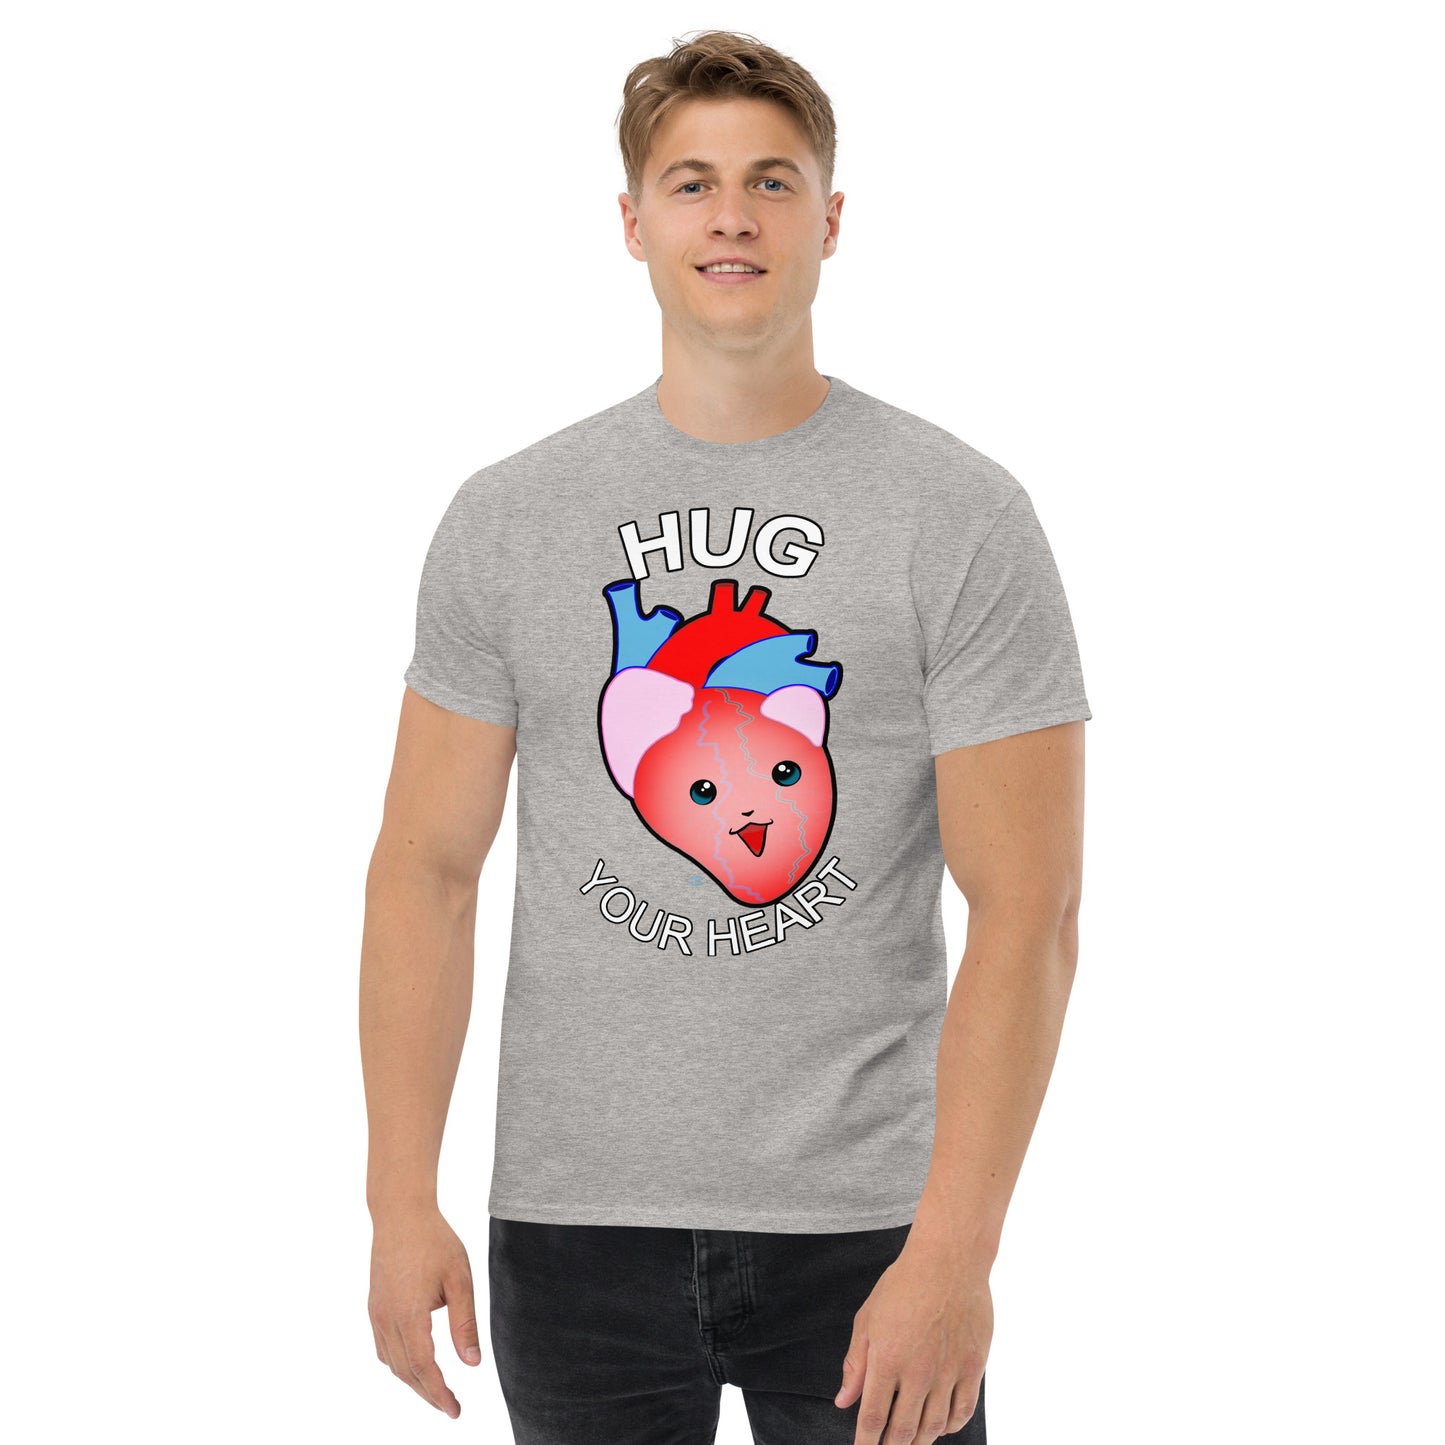 A Picture of a man wearing a short sleeved tshirt with a picture on the front of a smiling heart with the text "HUG Your Heart" - color sport grey